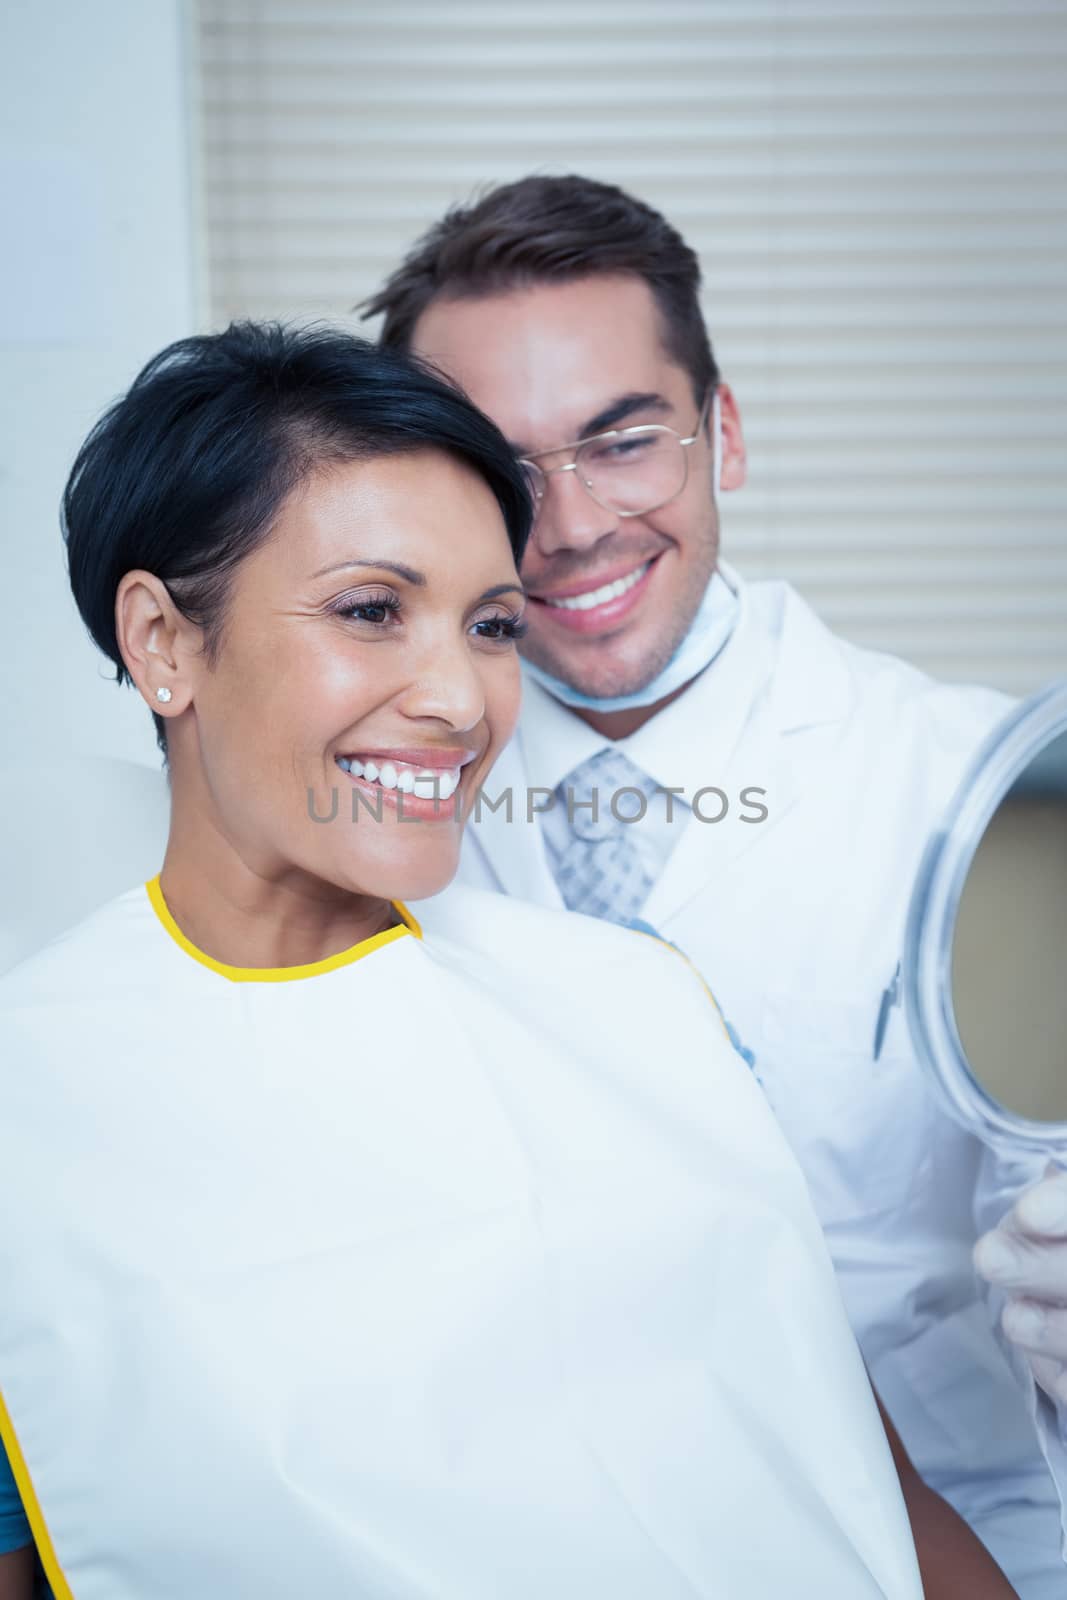 Smiling young woman looking at mirror in the dentists chair